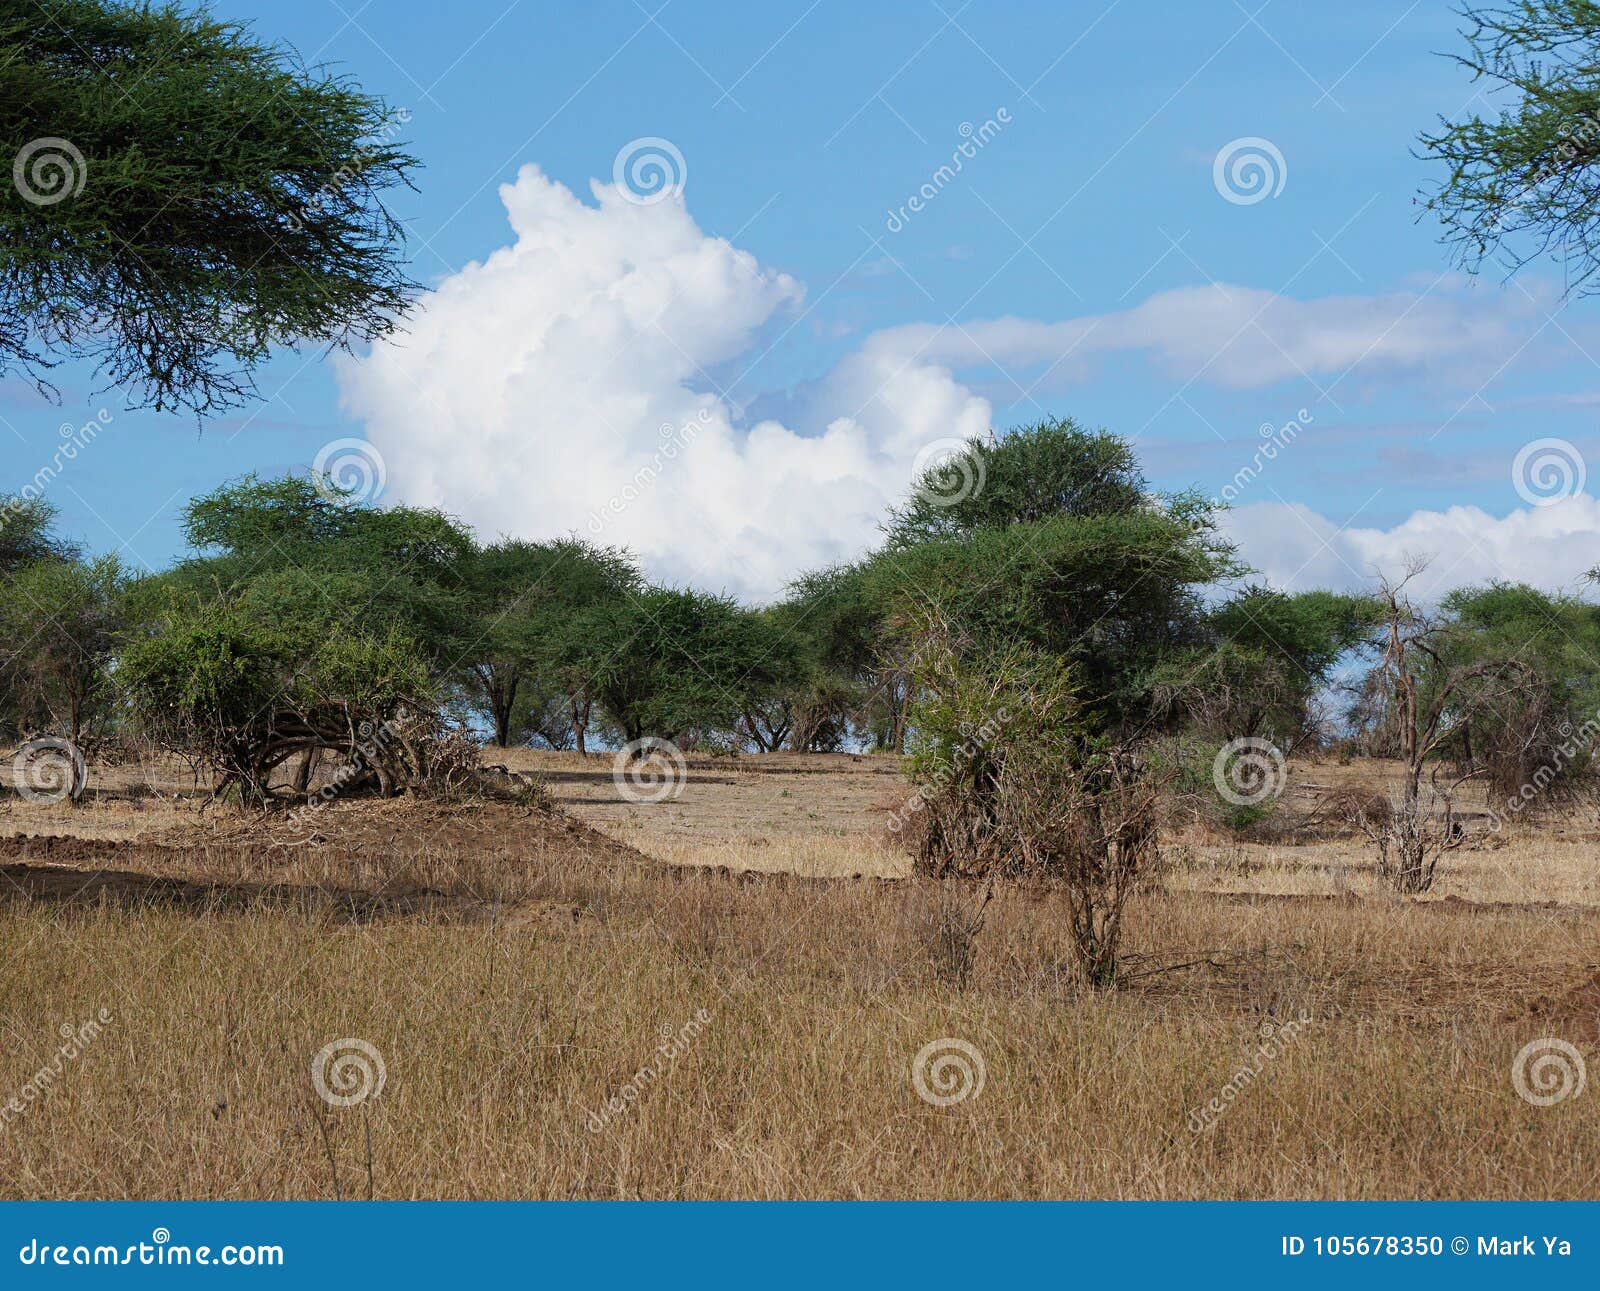 Beautiful Views Of Africa Jeeps With An Opening Top Stock Photo Image Of Super Travel